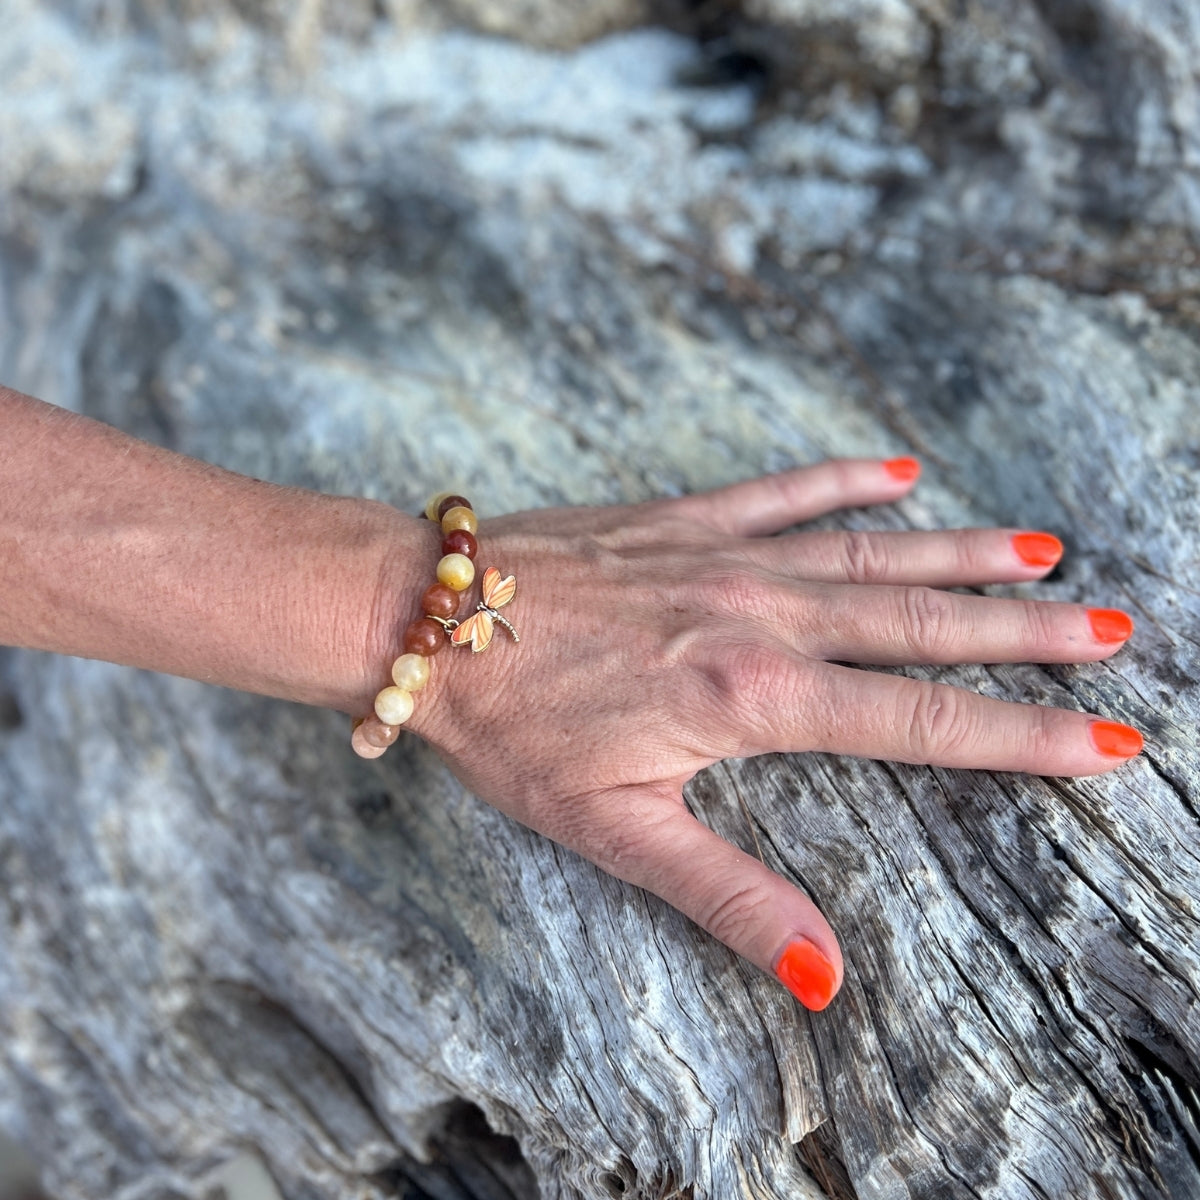 Allow the Dragonfly Whispers Bracelet to light your way, inspiring you to glide effortlessly through life's transformations, plunge into the depths of self-awareness, and radiate your authentic brilliance with every step you take.